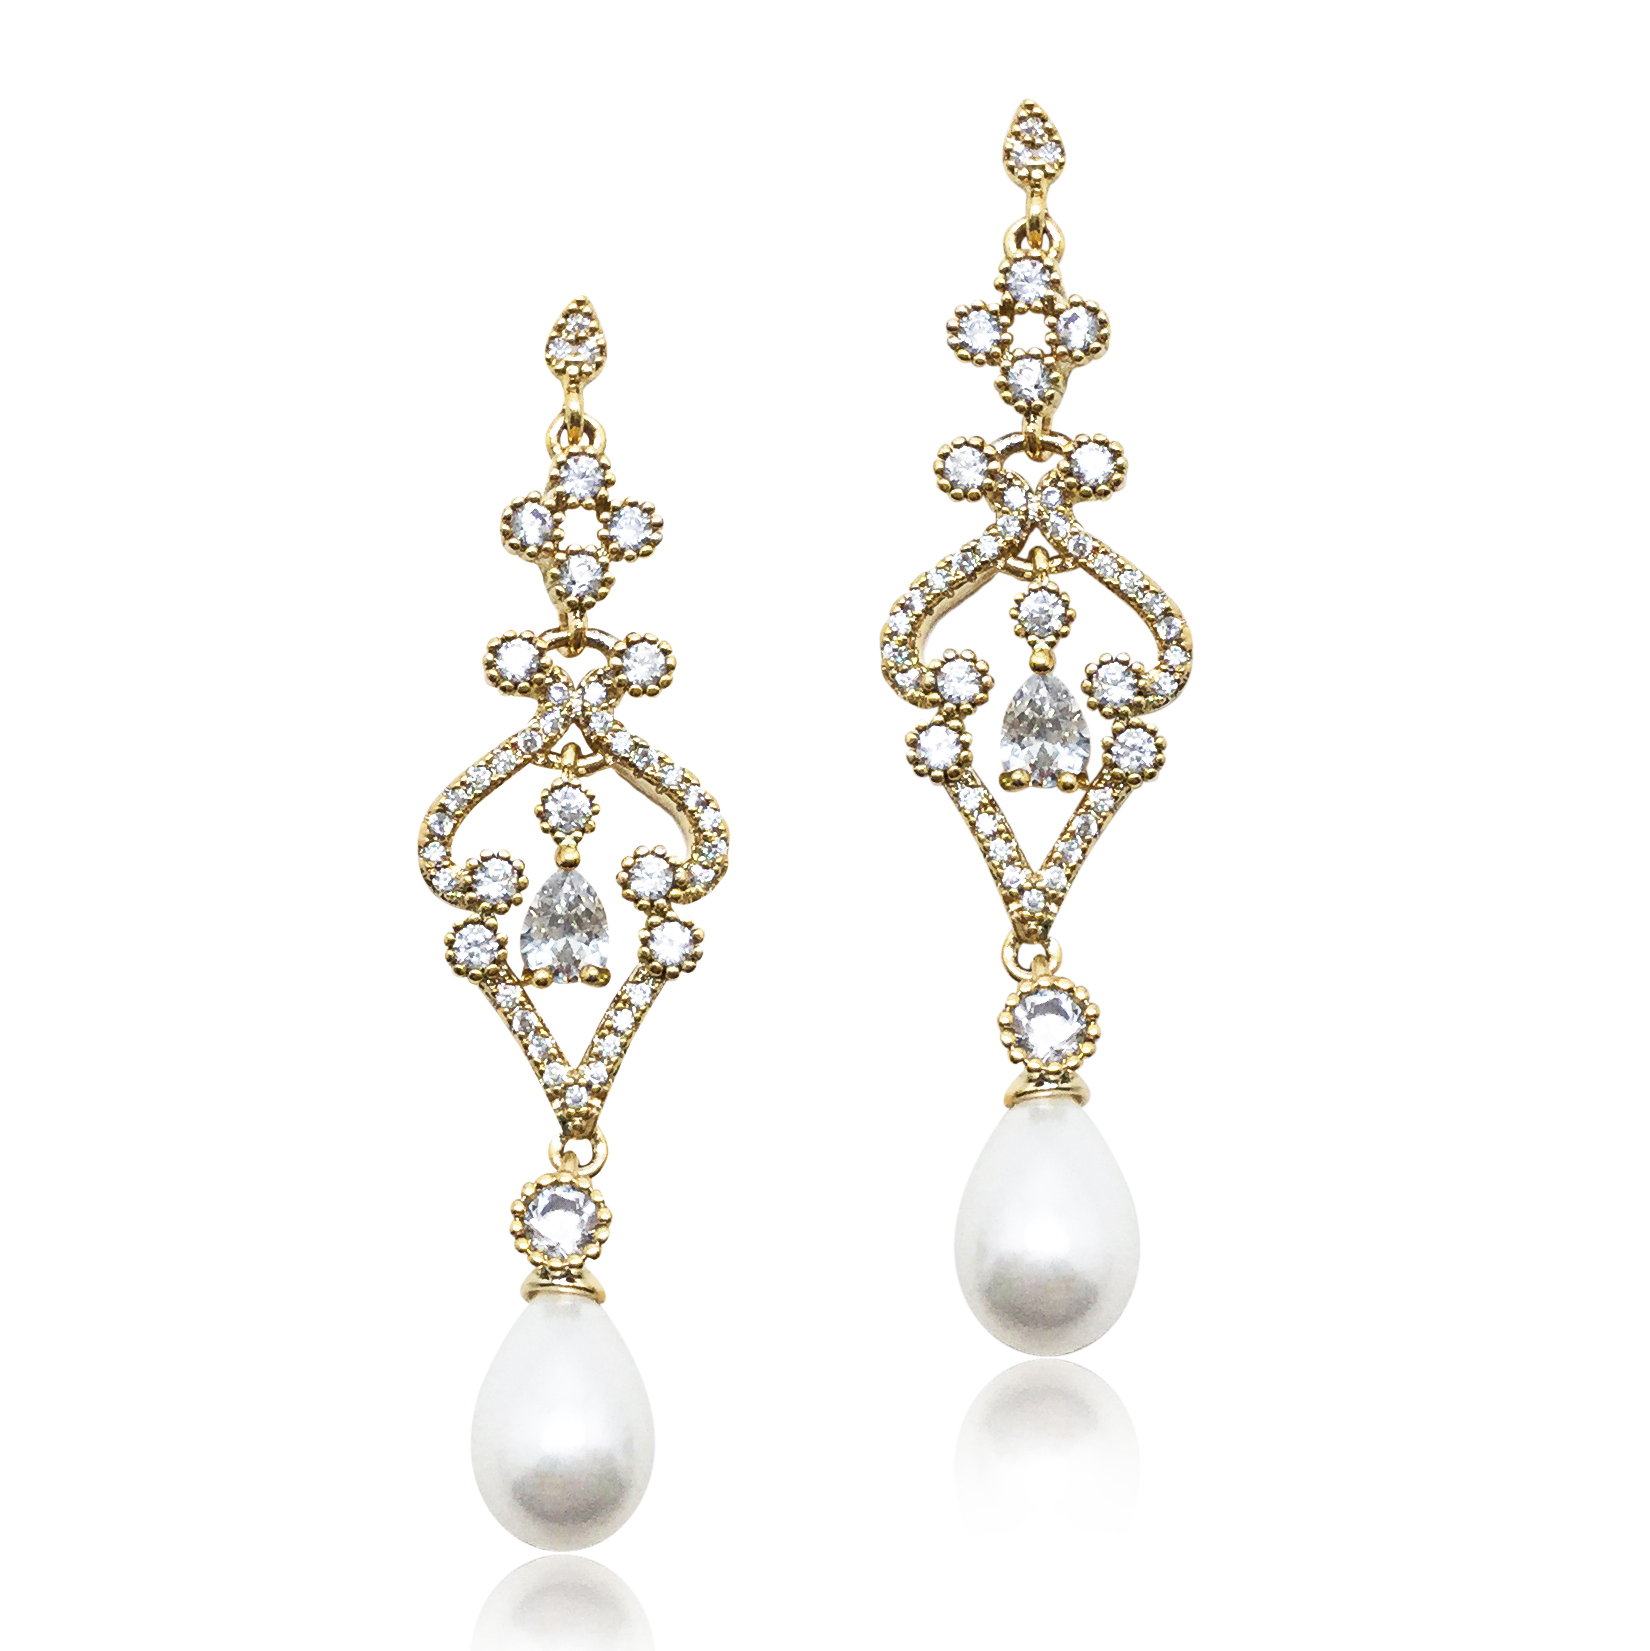 Gold And Pearl Drop Earrings|Amora|Jeanette Maree